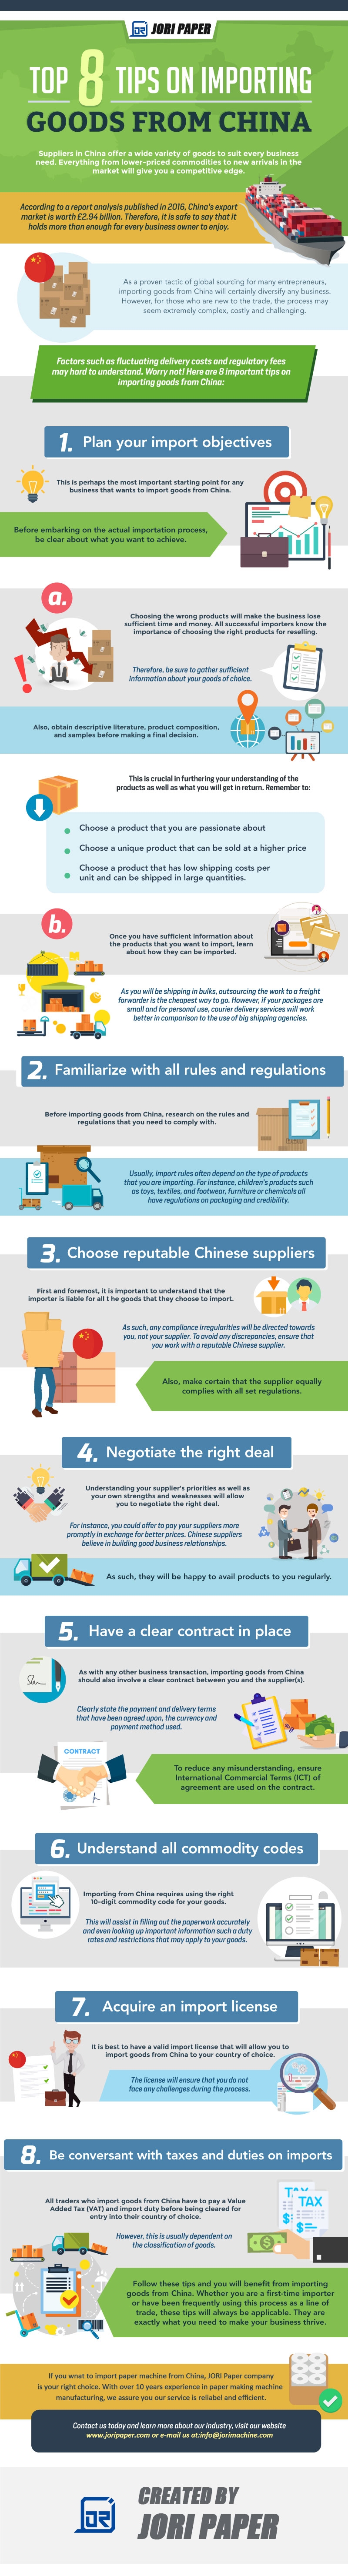 Top 8 Tips On Importing Goods From China